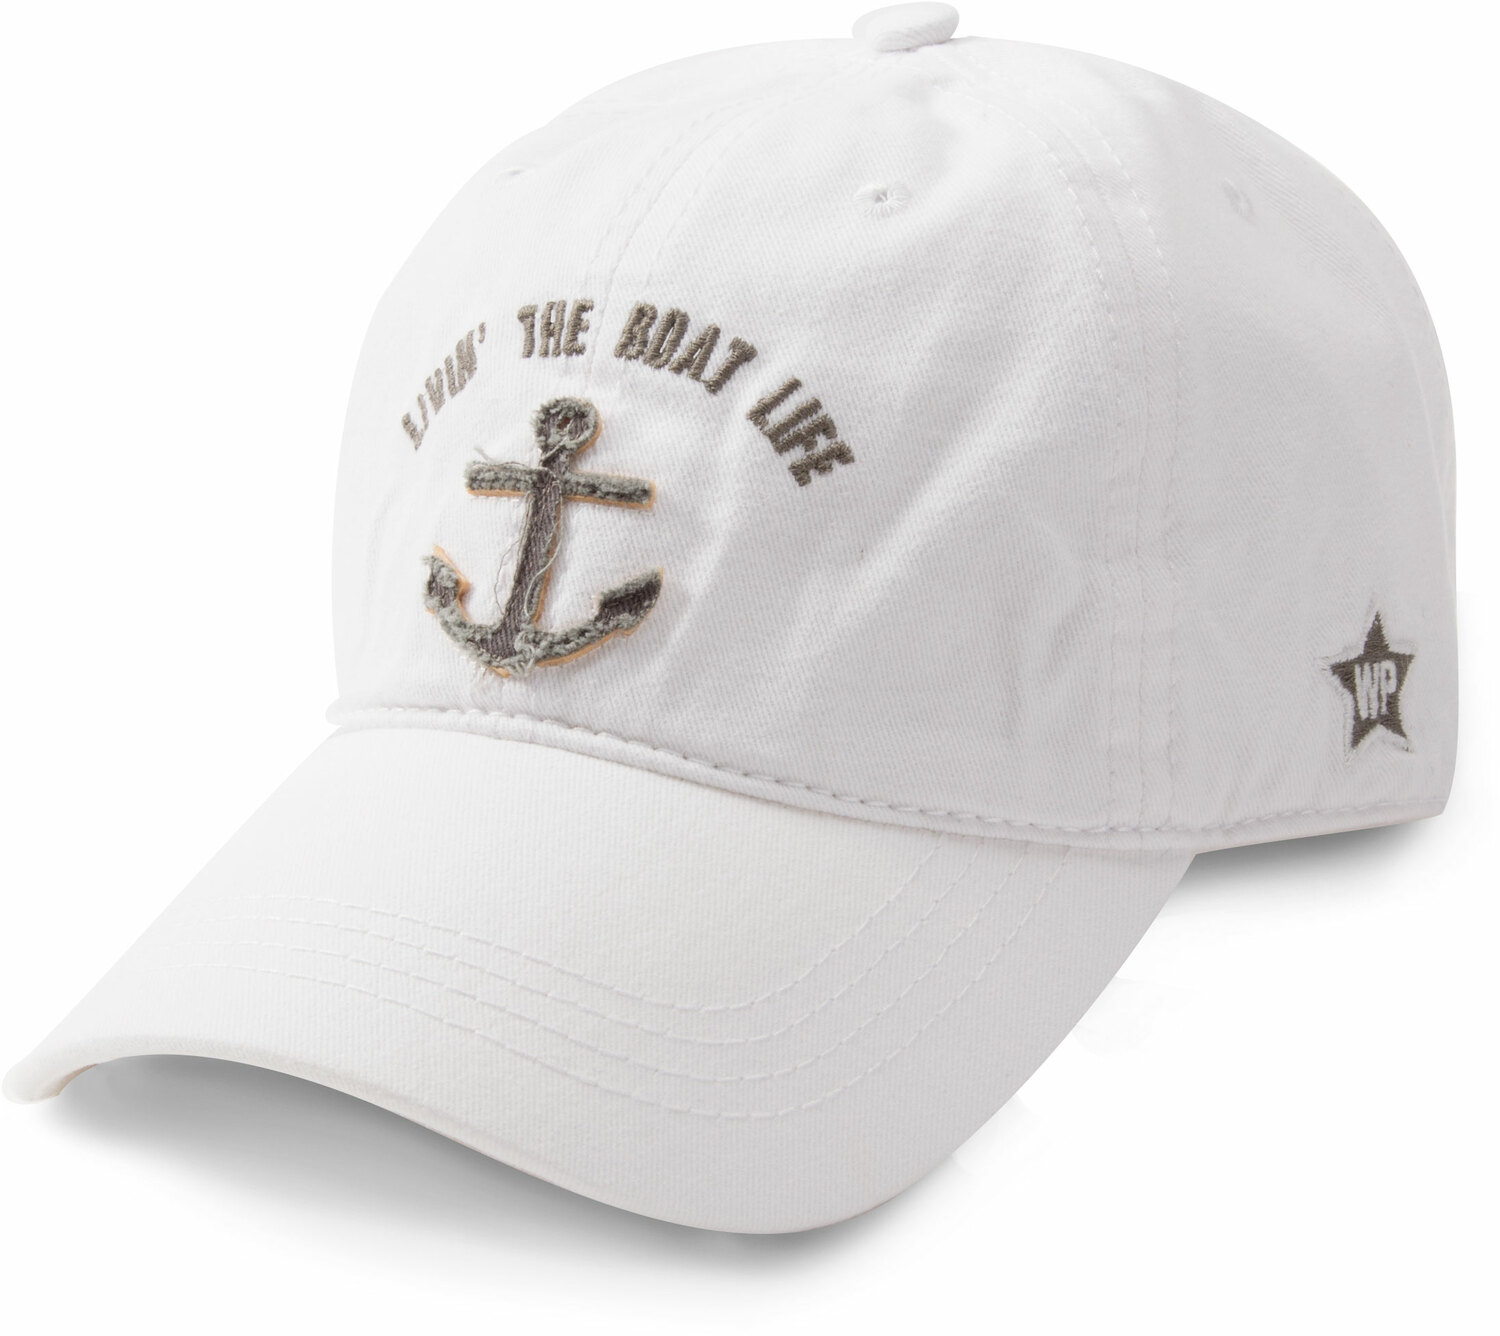 Livin' The Boat Life by We People - Livin' The Boat Life - White Adjustable Hat